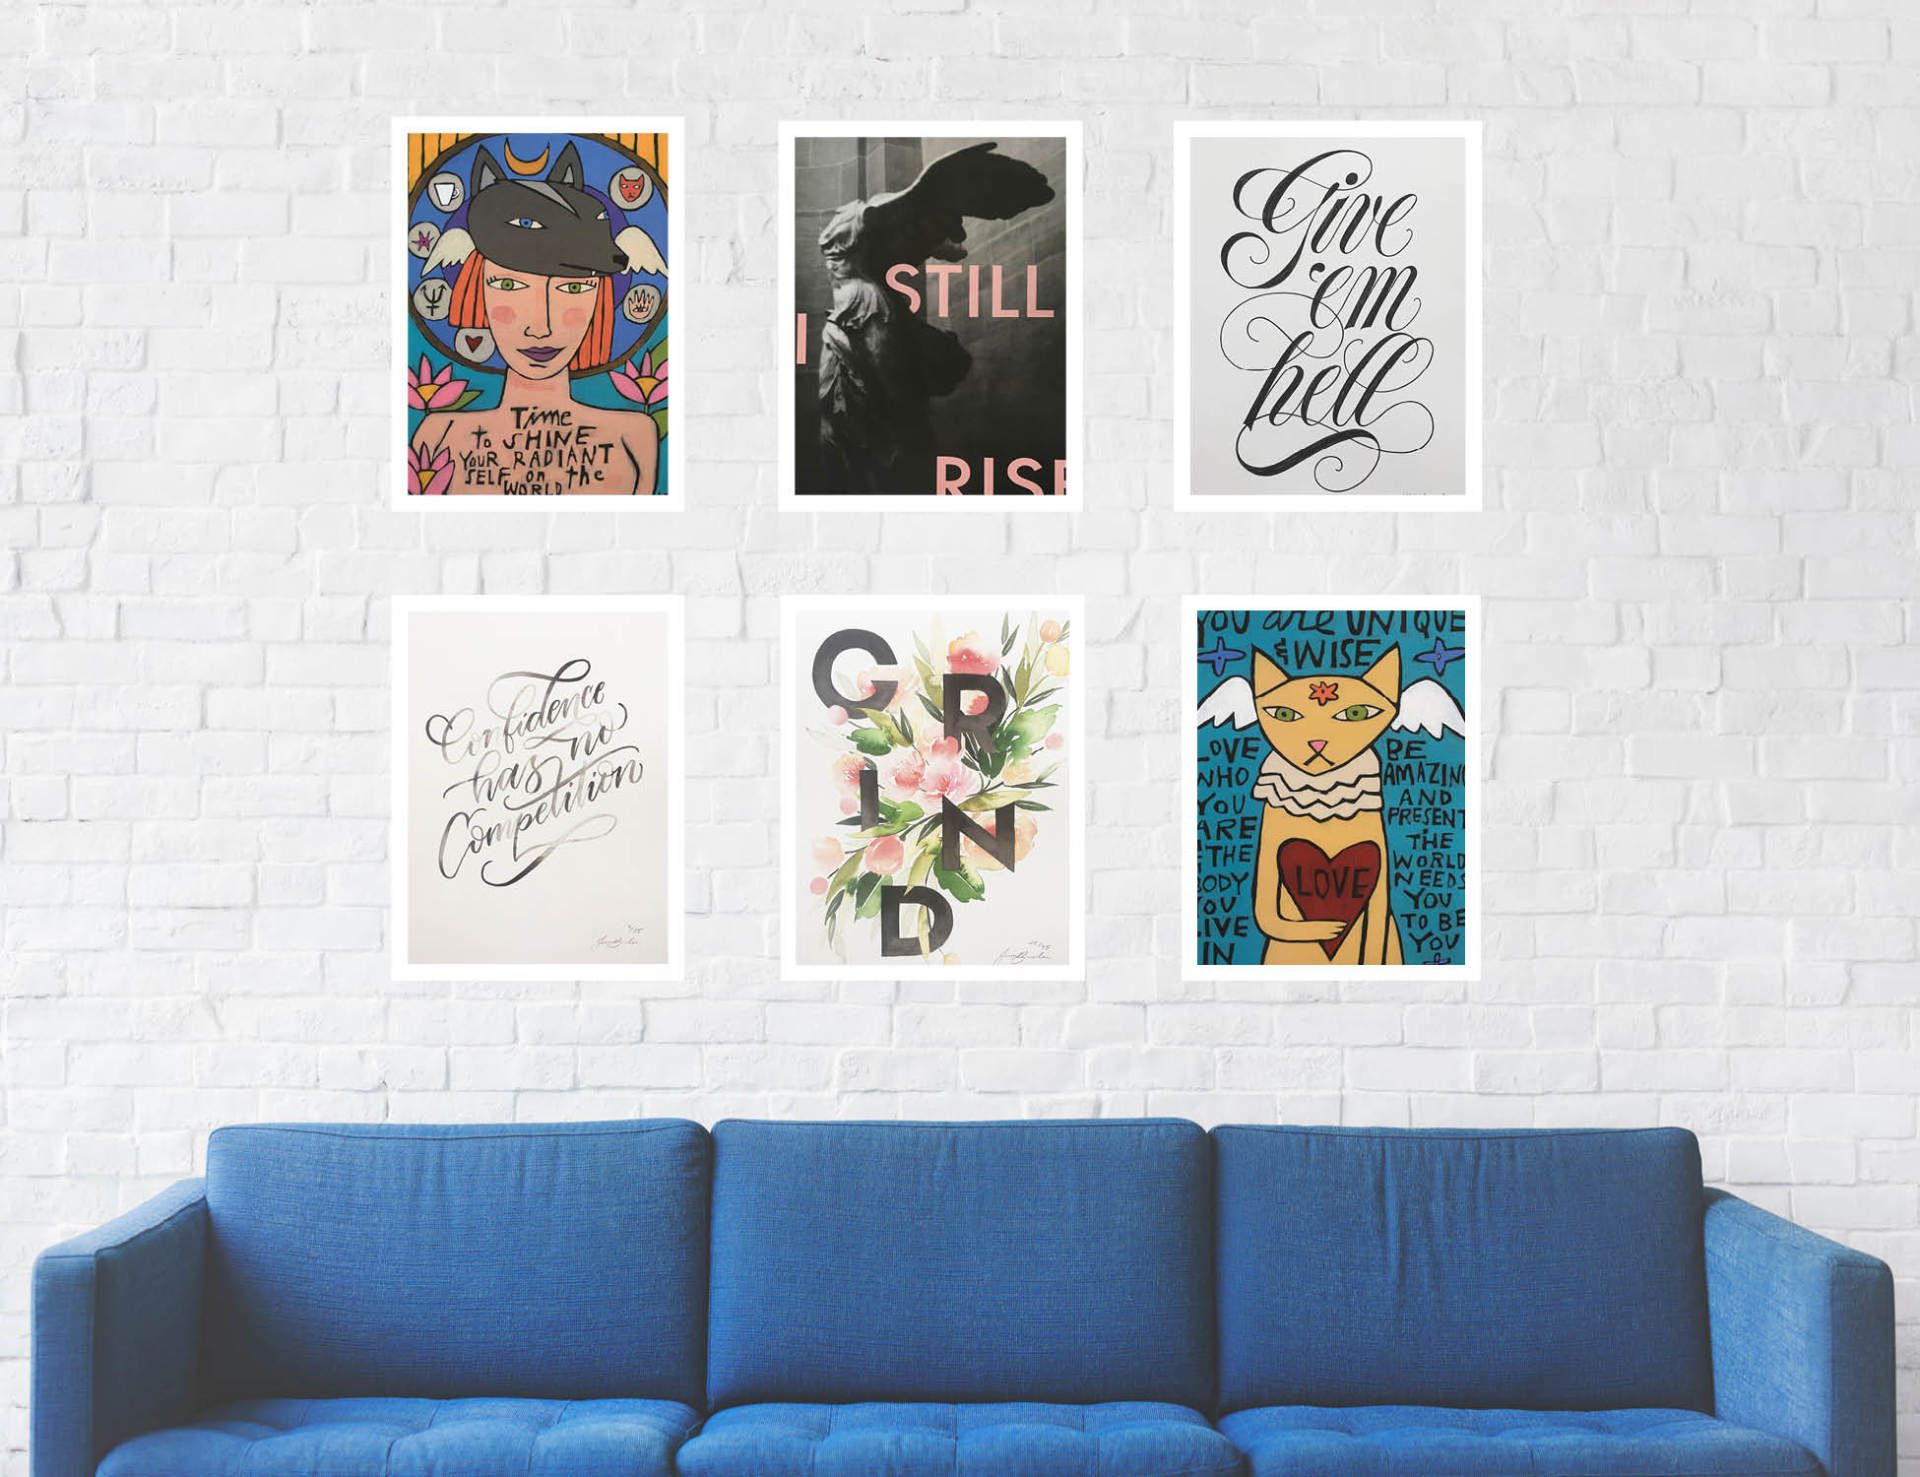 Gallery wall package #5